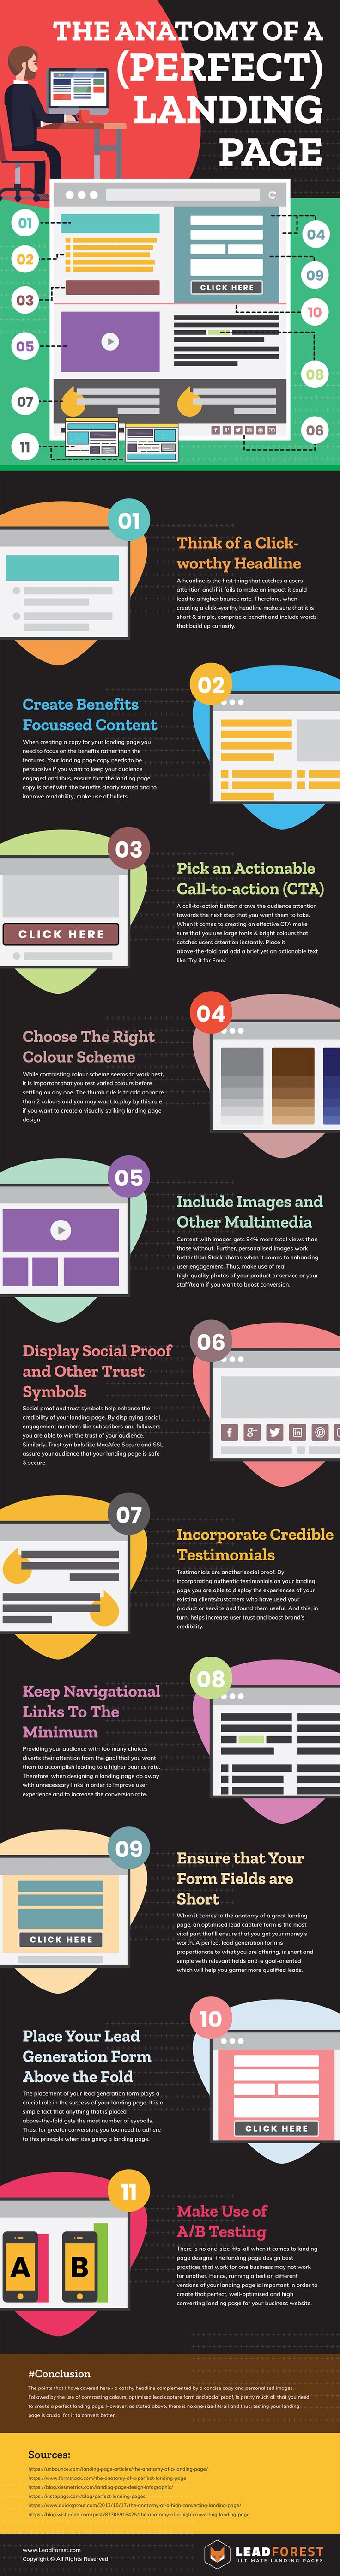 Advertising-Infographics-Web-Design-Tips-11-Essential-Elements-for-the-Perfect-Home-Page-Infographic Advertising Infographics : Web Design Tips: 11 Essential Elements for the Perfect Home Page [Infographic]